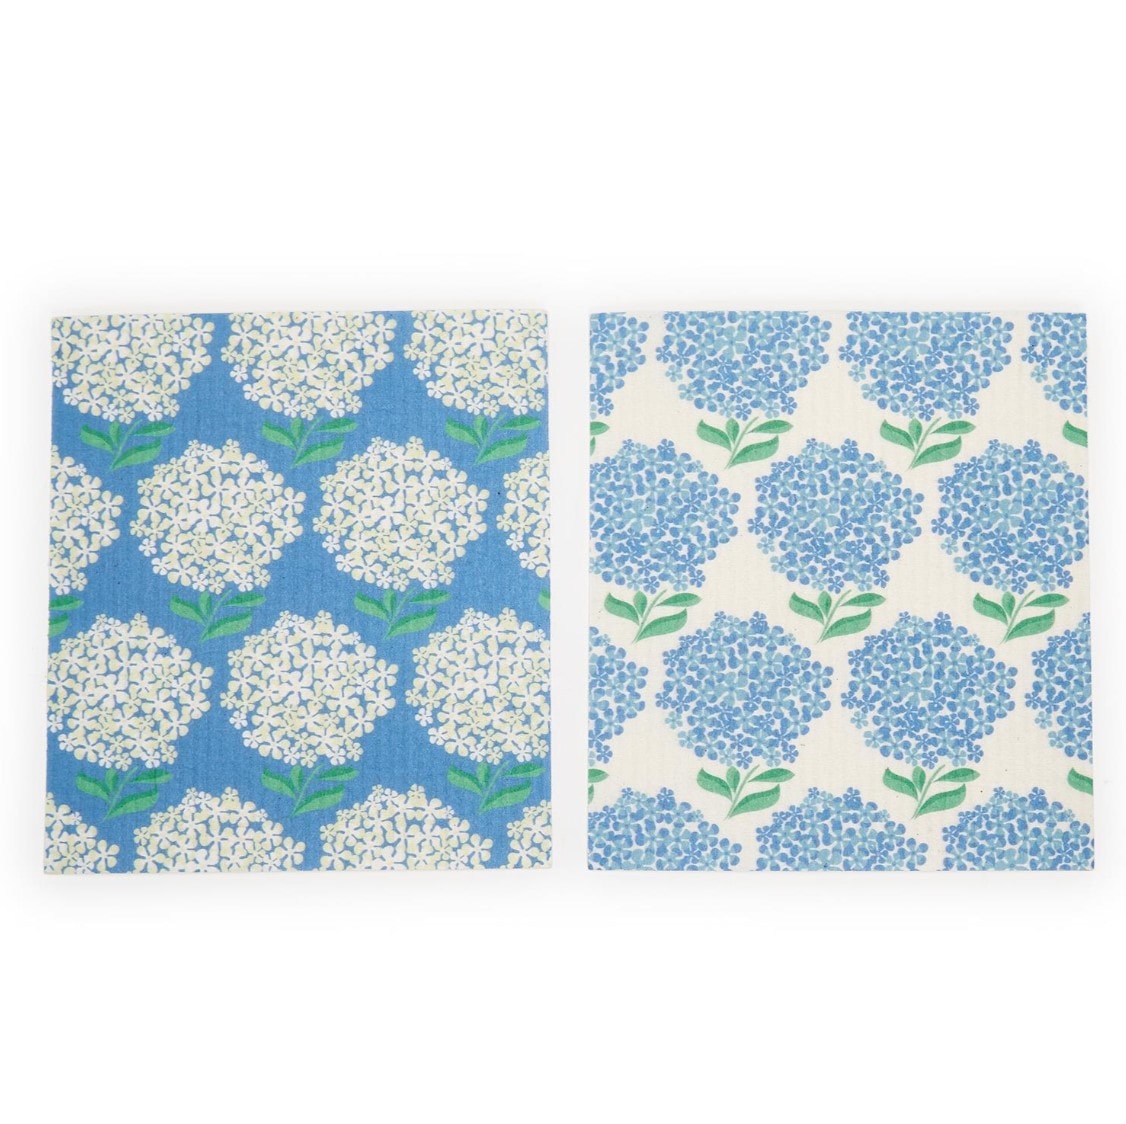 Two's Company Biodegradable Kitchen Cloth